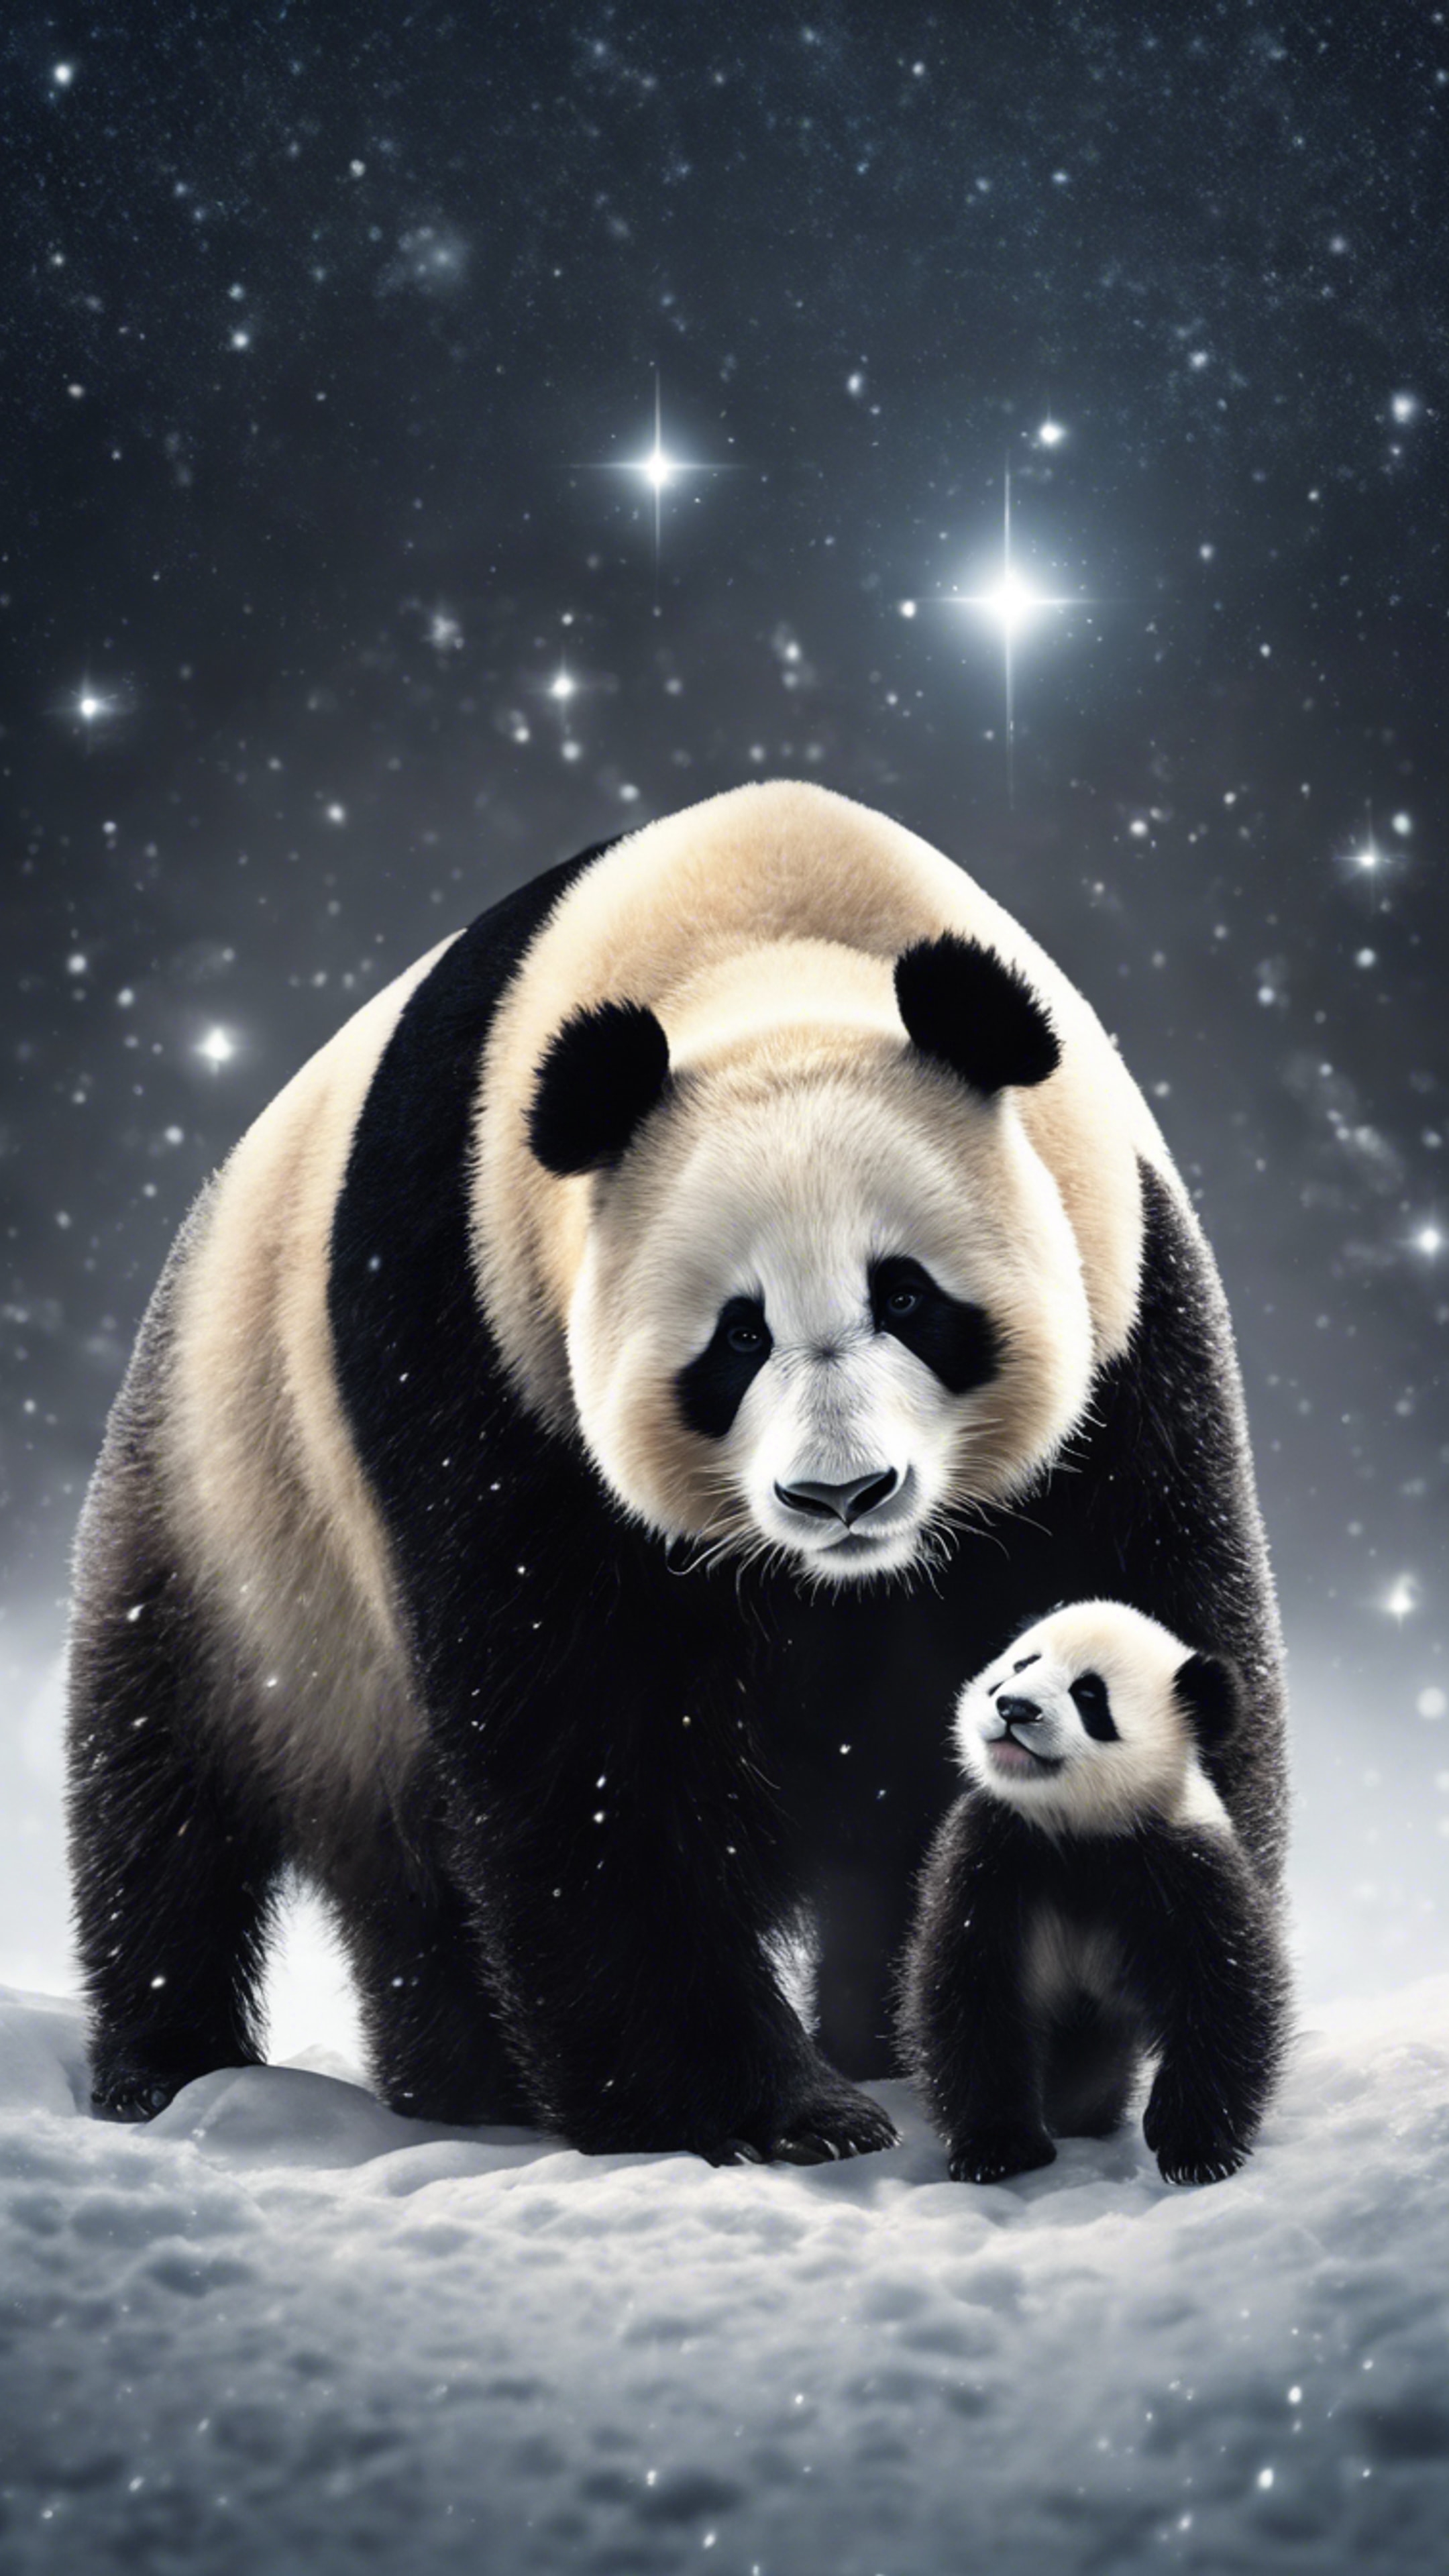 A mother panda with her cubs, peacefully taking a stroll on a silent, snowy night under a blanket of stars. 牆紙[875b5ef660eb48ddb691]